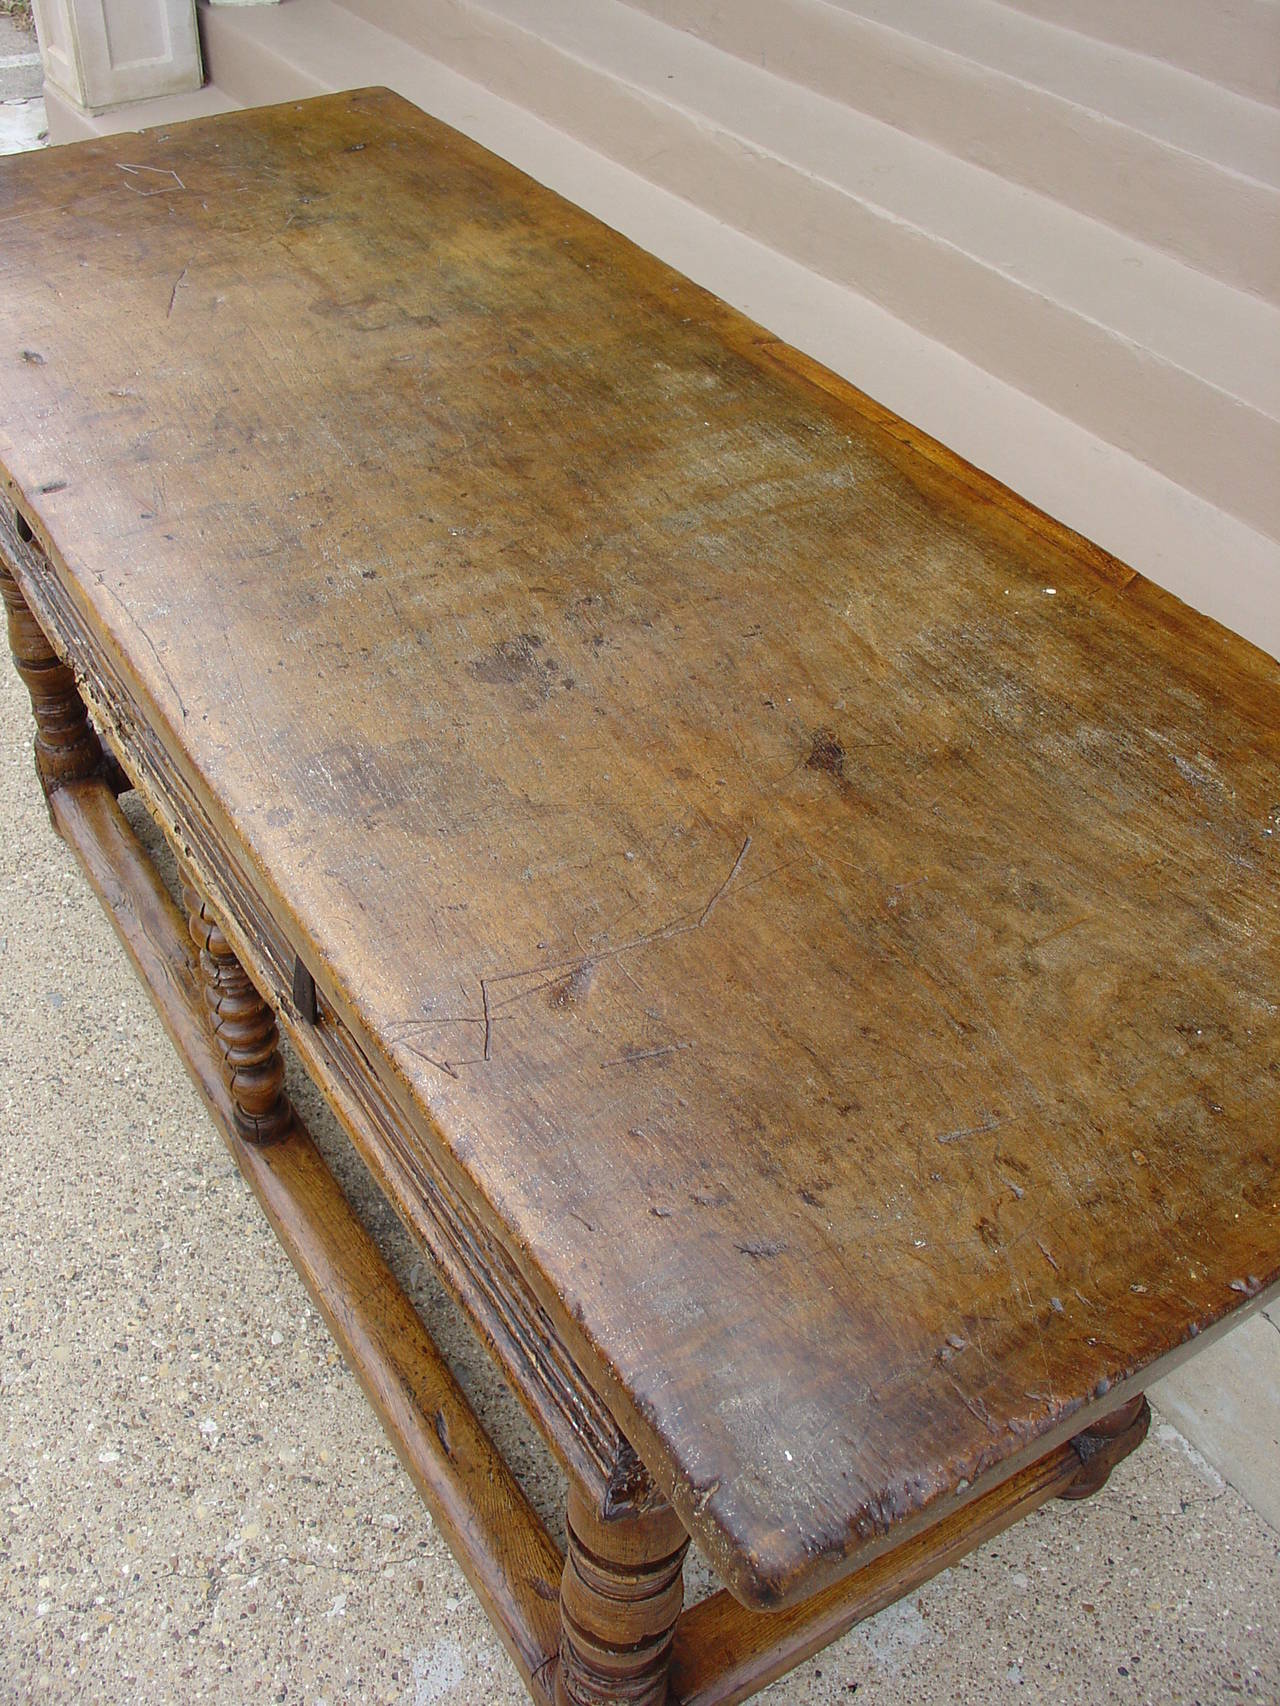 Antique Spanish Walnut Wood Table from the 1600’s 1